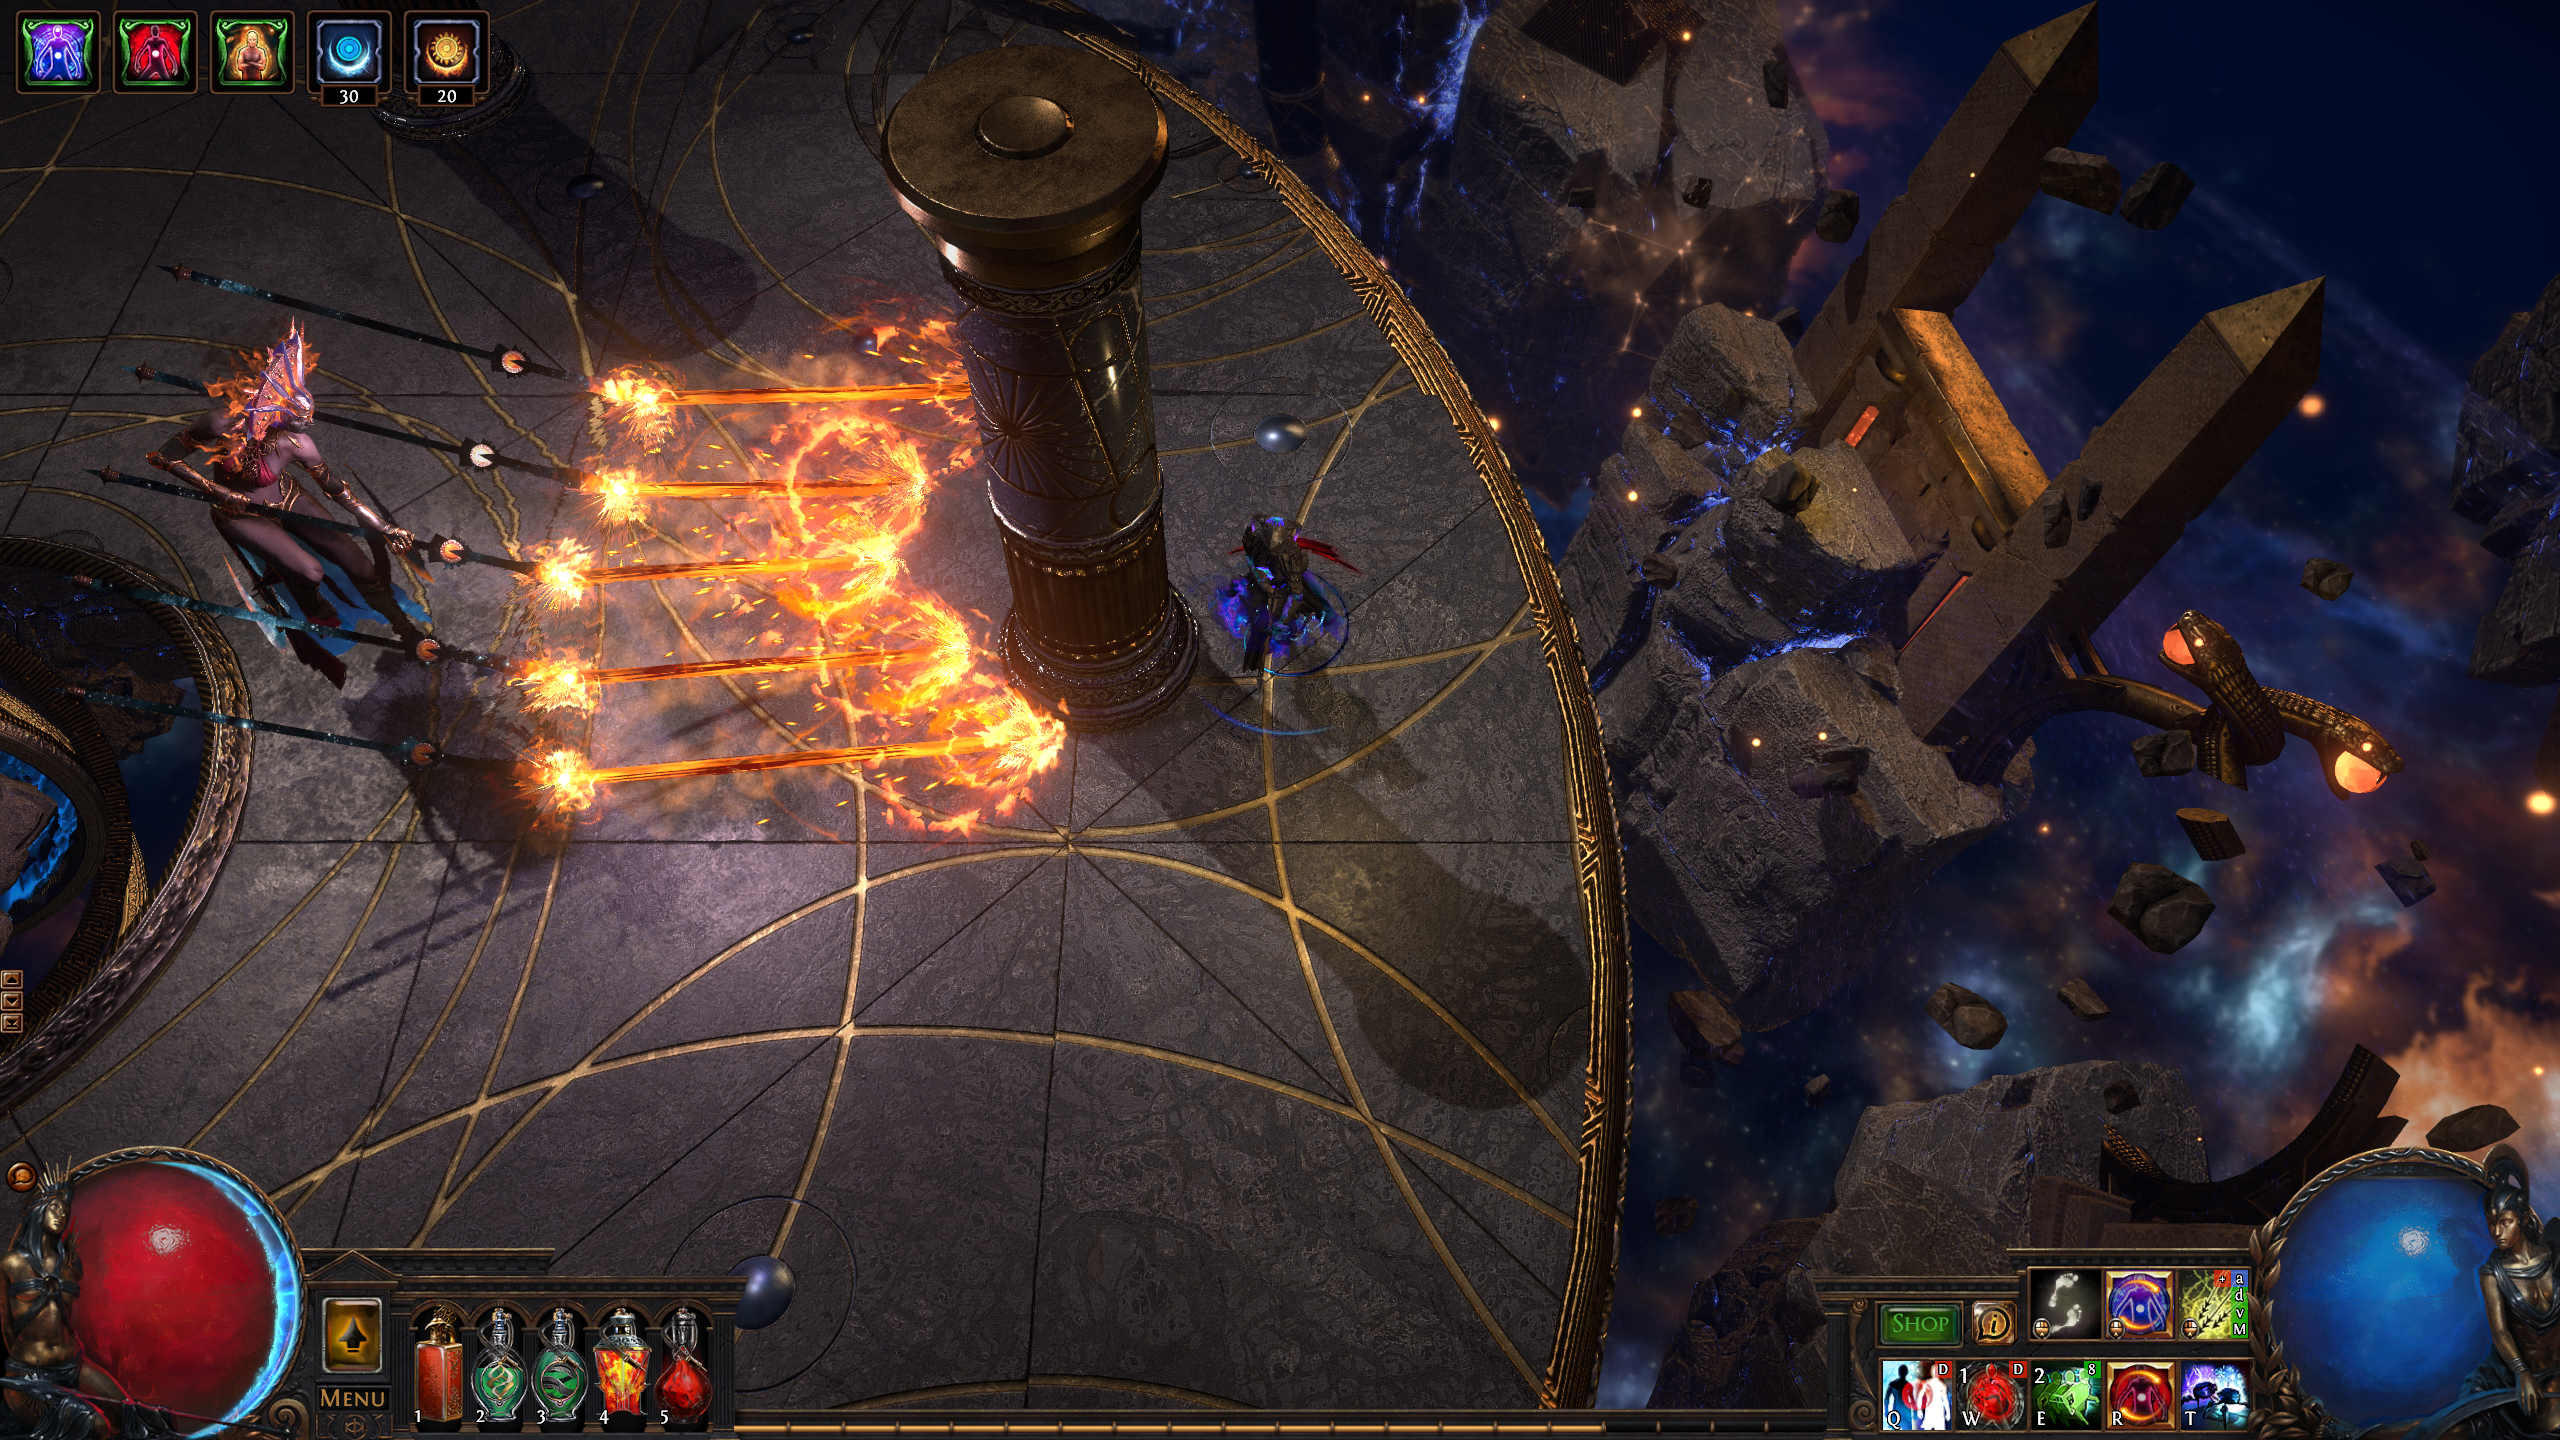 Battling the new Black Star boss in Path Of Exile